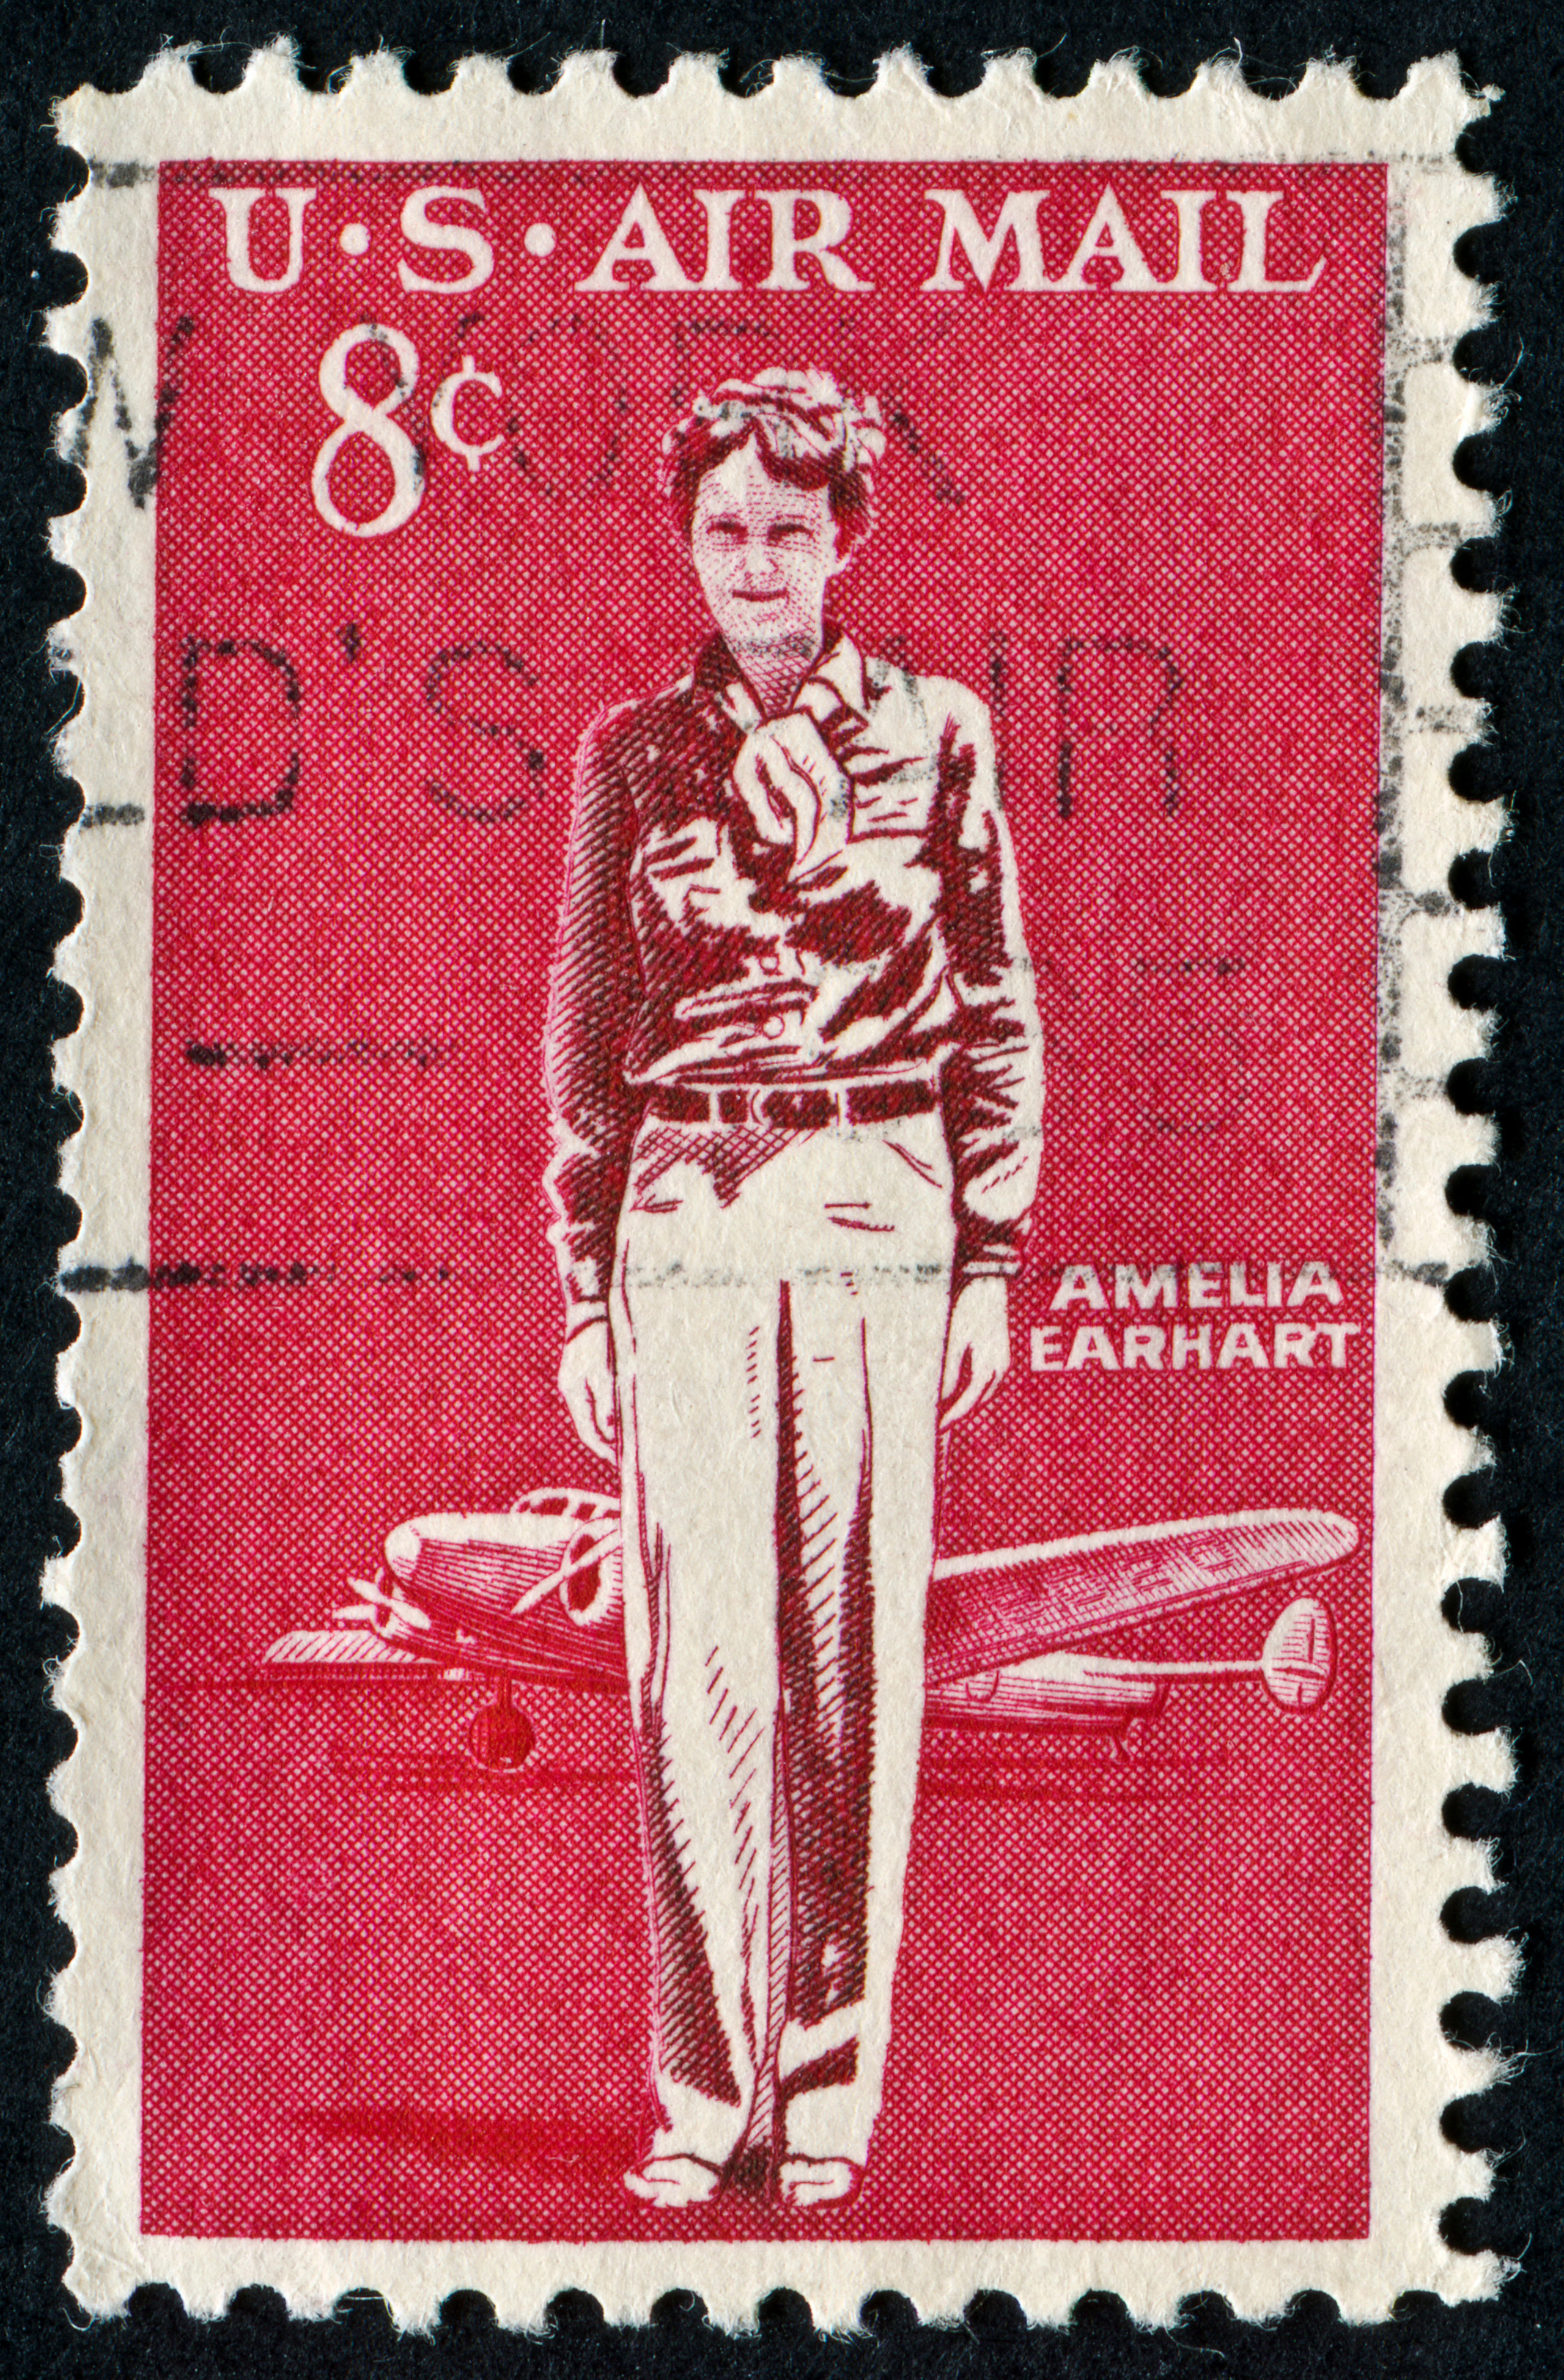 Richmond, Virginia, USA - February 15th, 2012: Cancelled Eight Cent Stamp From The United States Featuring Amelia Earhart. She Was The First Woman To Fly Solo Across The Atlantic Ocean.